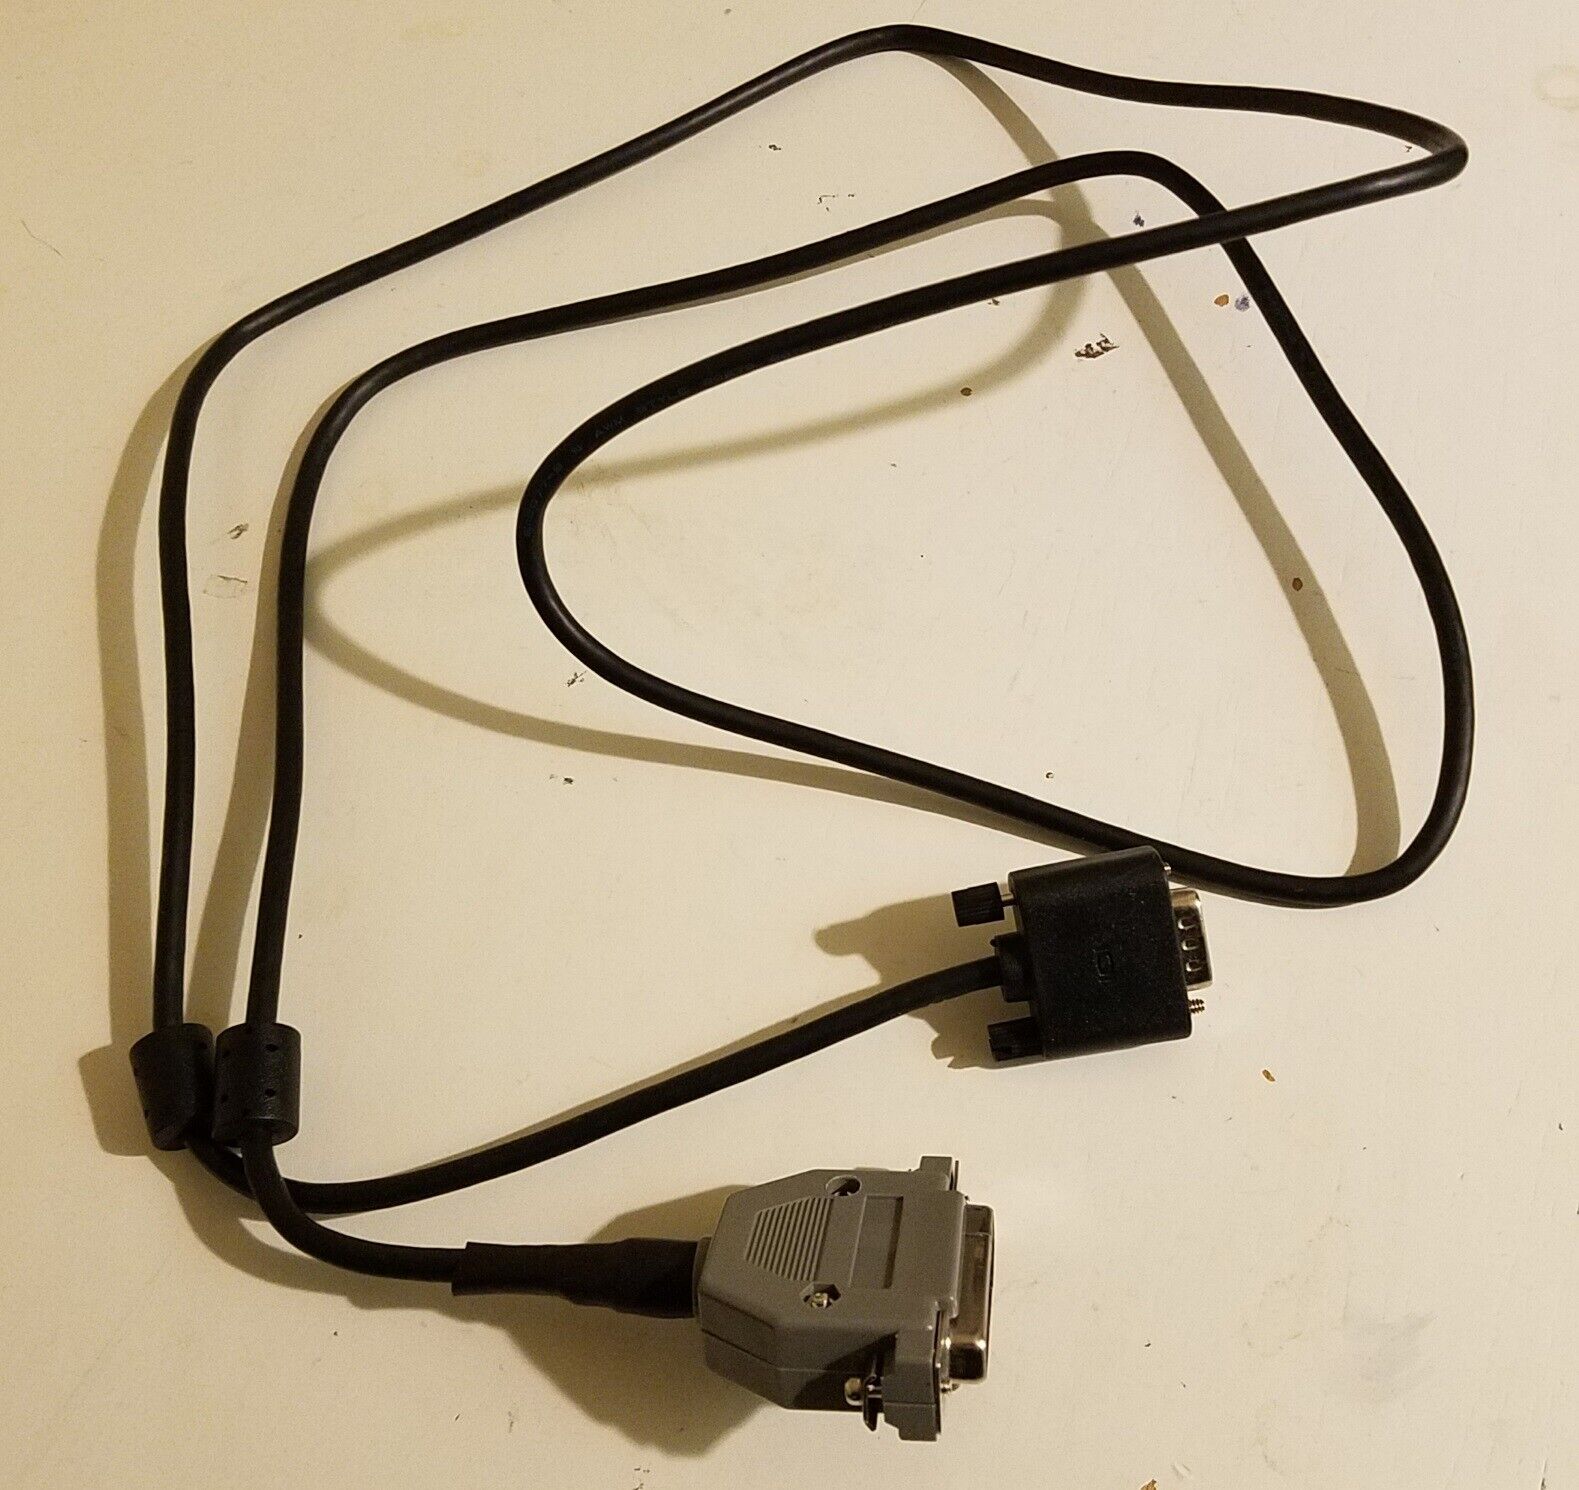 AMIGA DB23 RGB Female to VGA Male Monitor Cable 5.9 ft. REAL NEW DB23 CONNECTOR